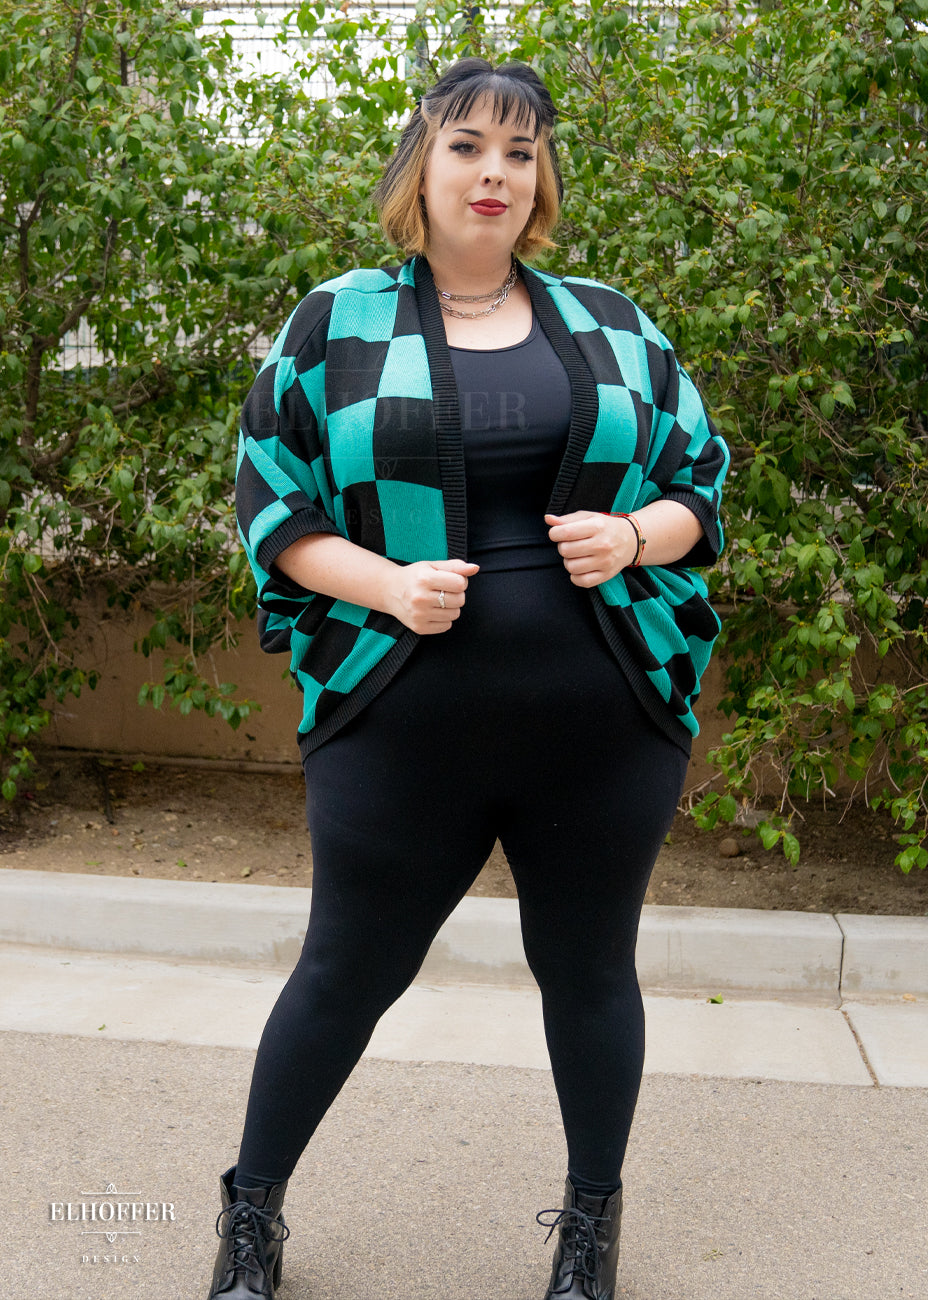 Katie Lynn, a fair skinned 2xl model with short black and blonde hair with bangs, is smiling while wearing a XL-3XL sample of a shrug with a black and green chessboard pattern.  The shrug featured 3/4 sleeves and black ribbing along edges and cuffs.